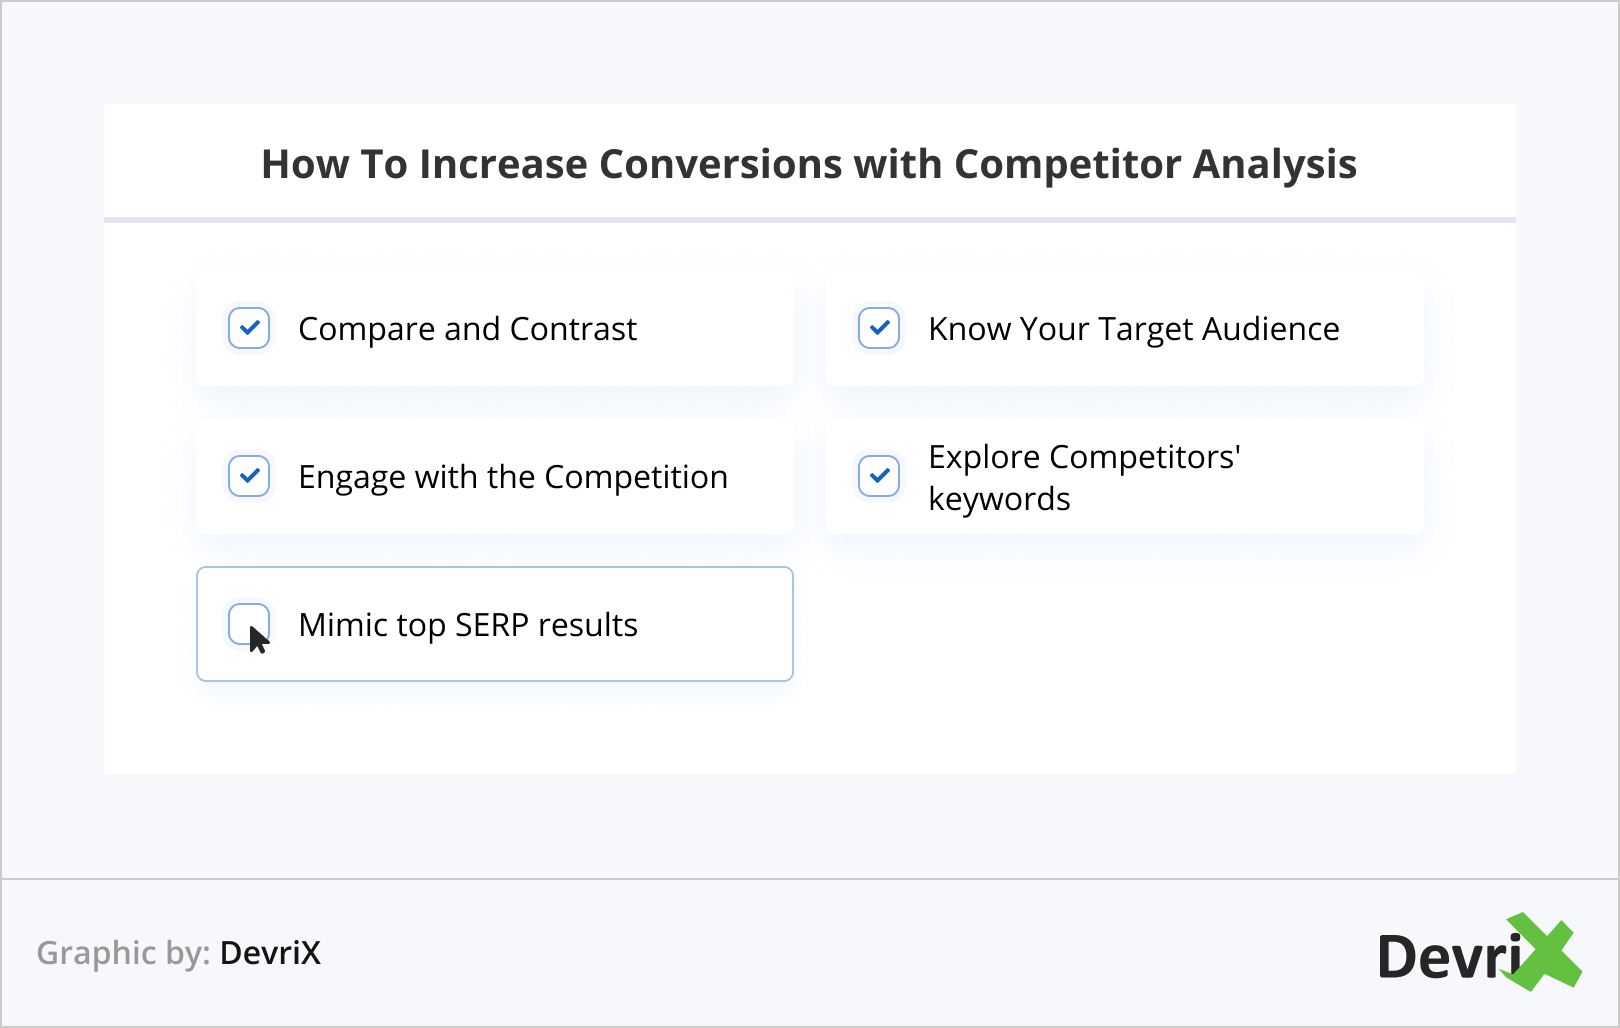 How To Increase Conversions with Competitor Analysis